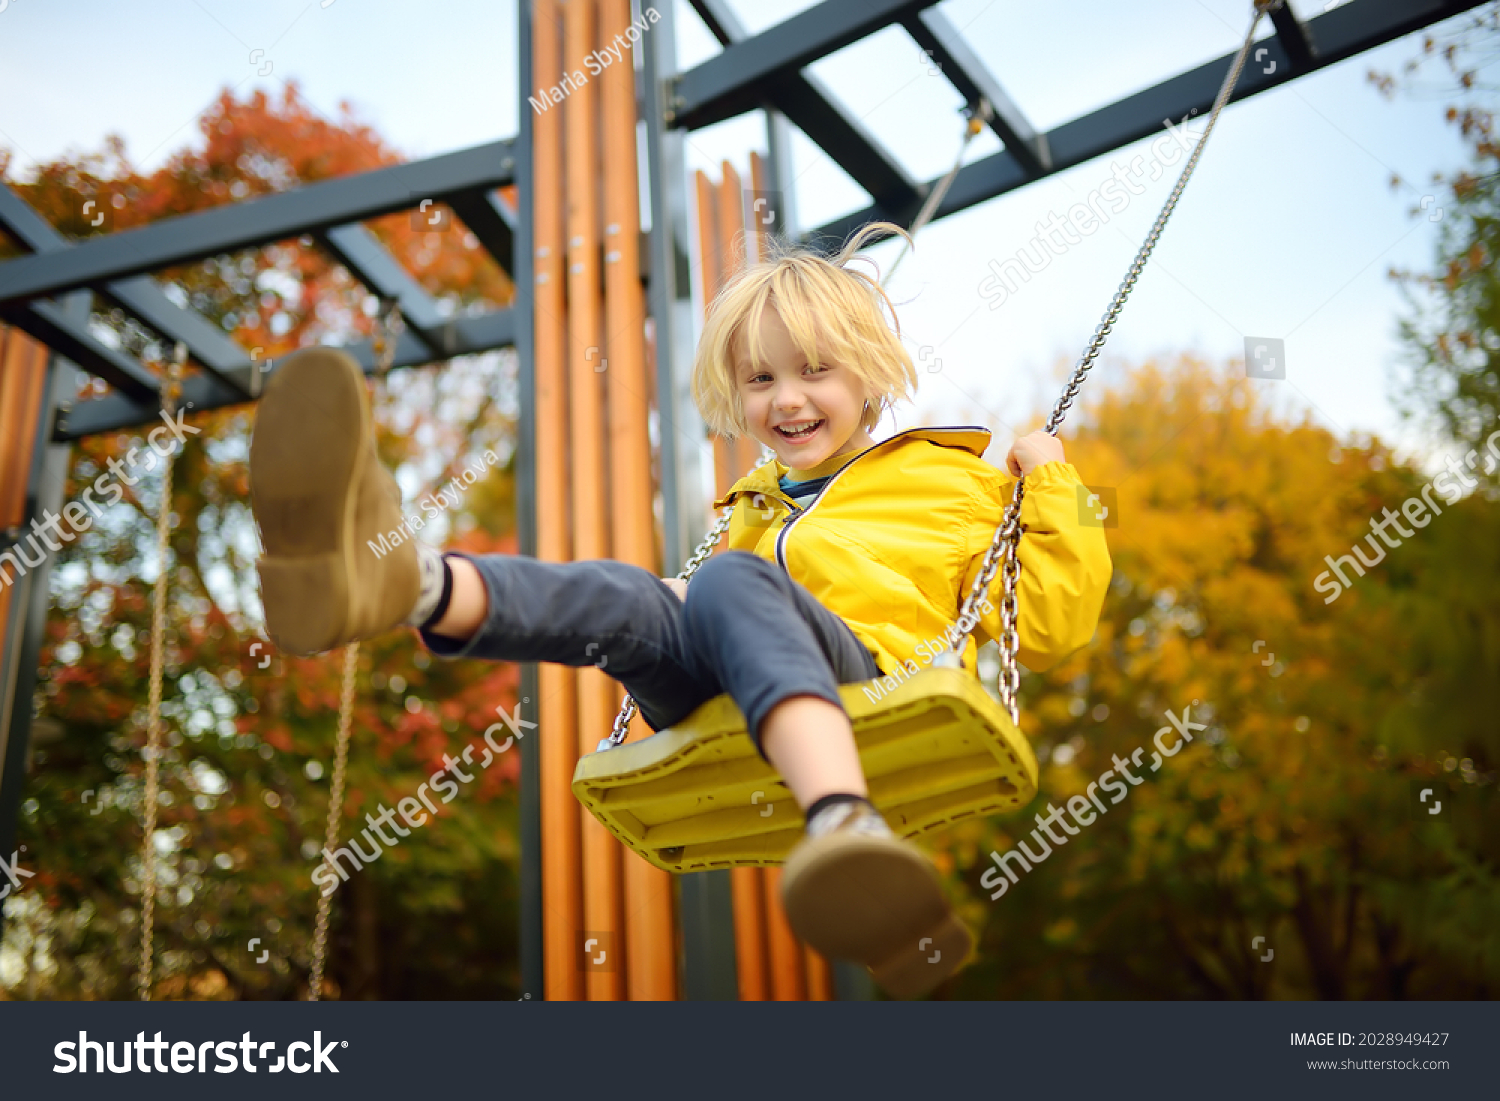 Little boy having fun on a swing on the playground in public park on autumn day. Happy child enjoy swinging. Active outdoors leisure for child in city #2028949427